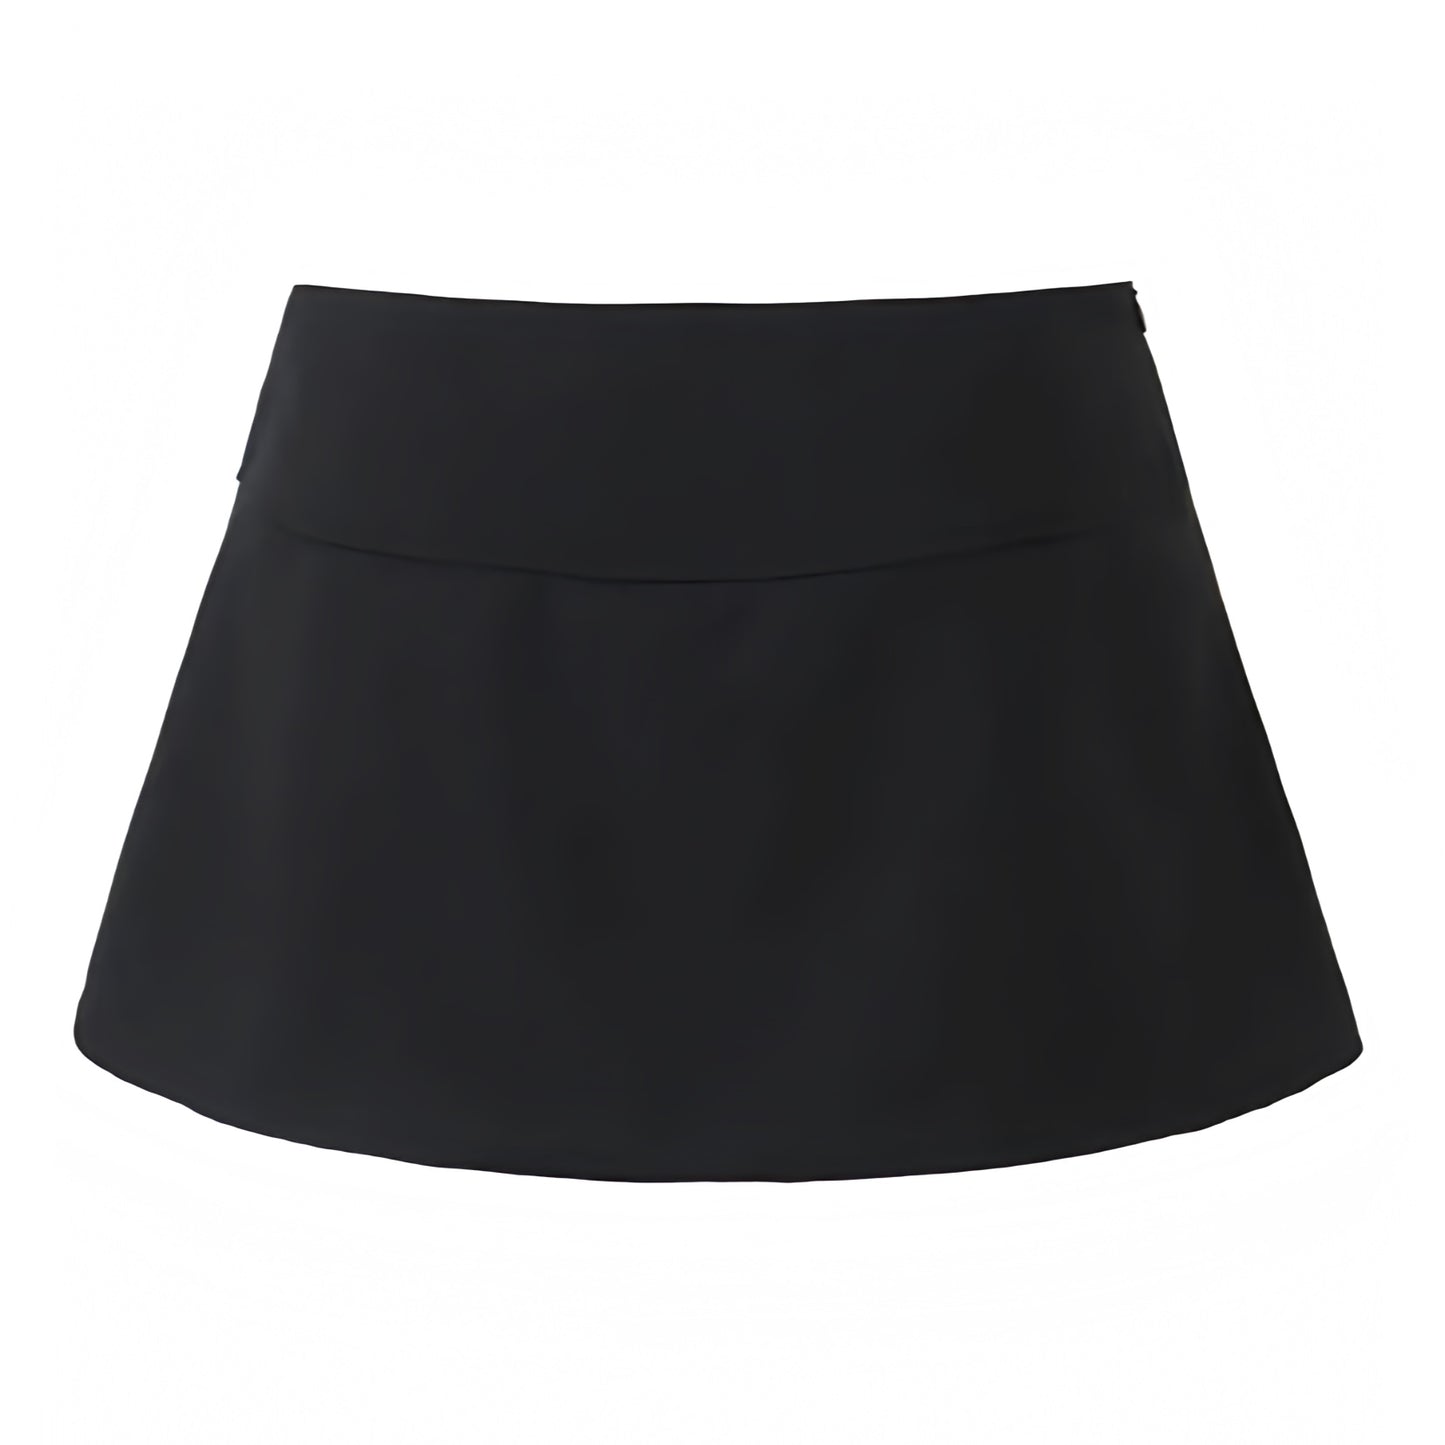 black-slim-tight-fit-pleated-bow-mid-low-rise-waisted-fitted-waist-slit-short-mini-skirt-skort-with-shorts-women-ladies-chic-trendy-spring-2024-summer-casual-feminine-office-siren-90s-minimalist-coquette-blokette-preppy-school-academia-club-wear-night-out-sexy-party-korean-stockholm-style-zara-revolve-aritzia-brandy-melville-urban-outfitters